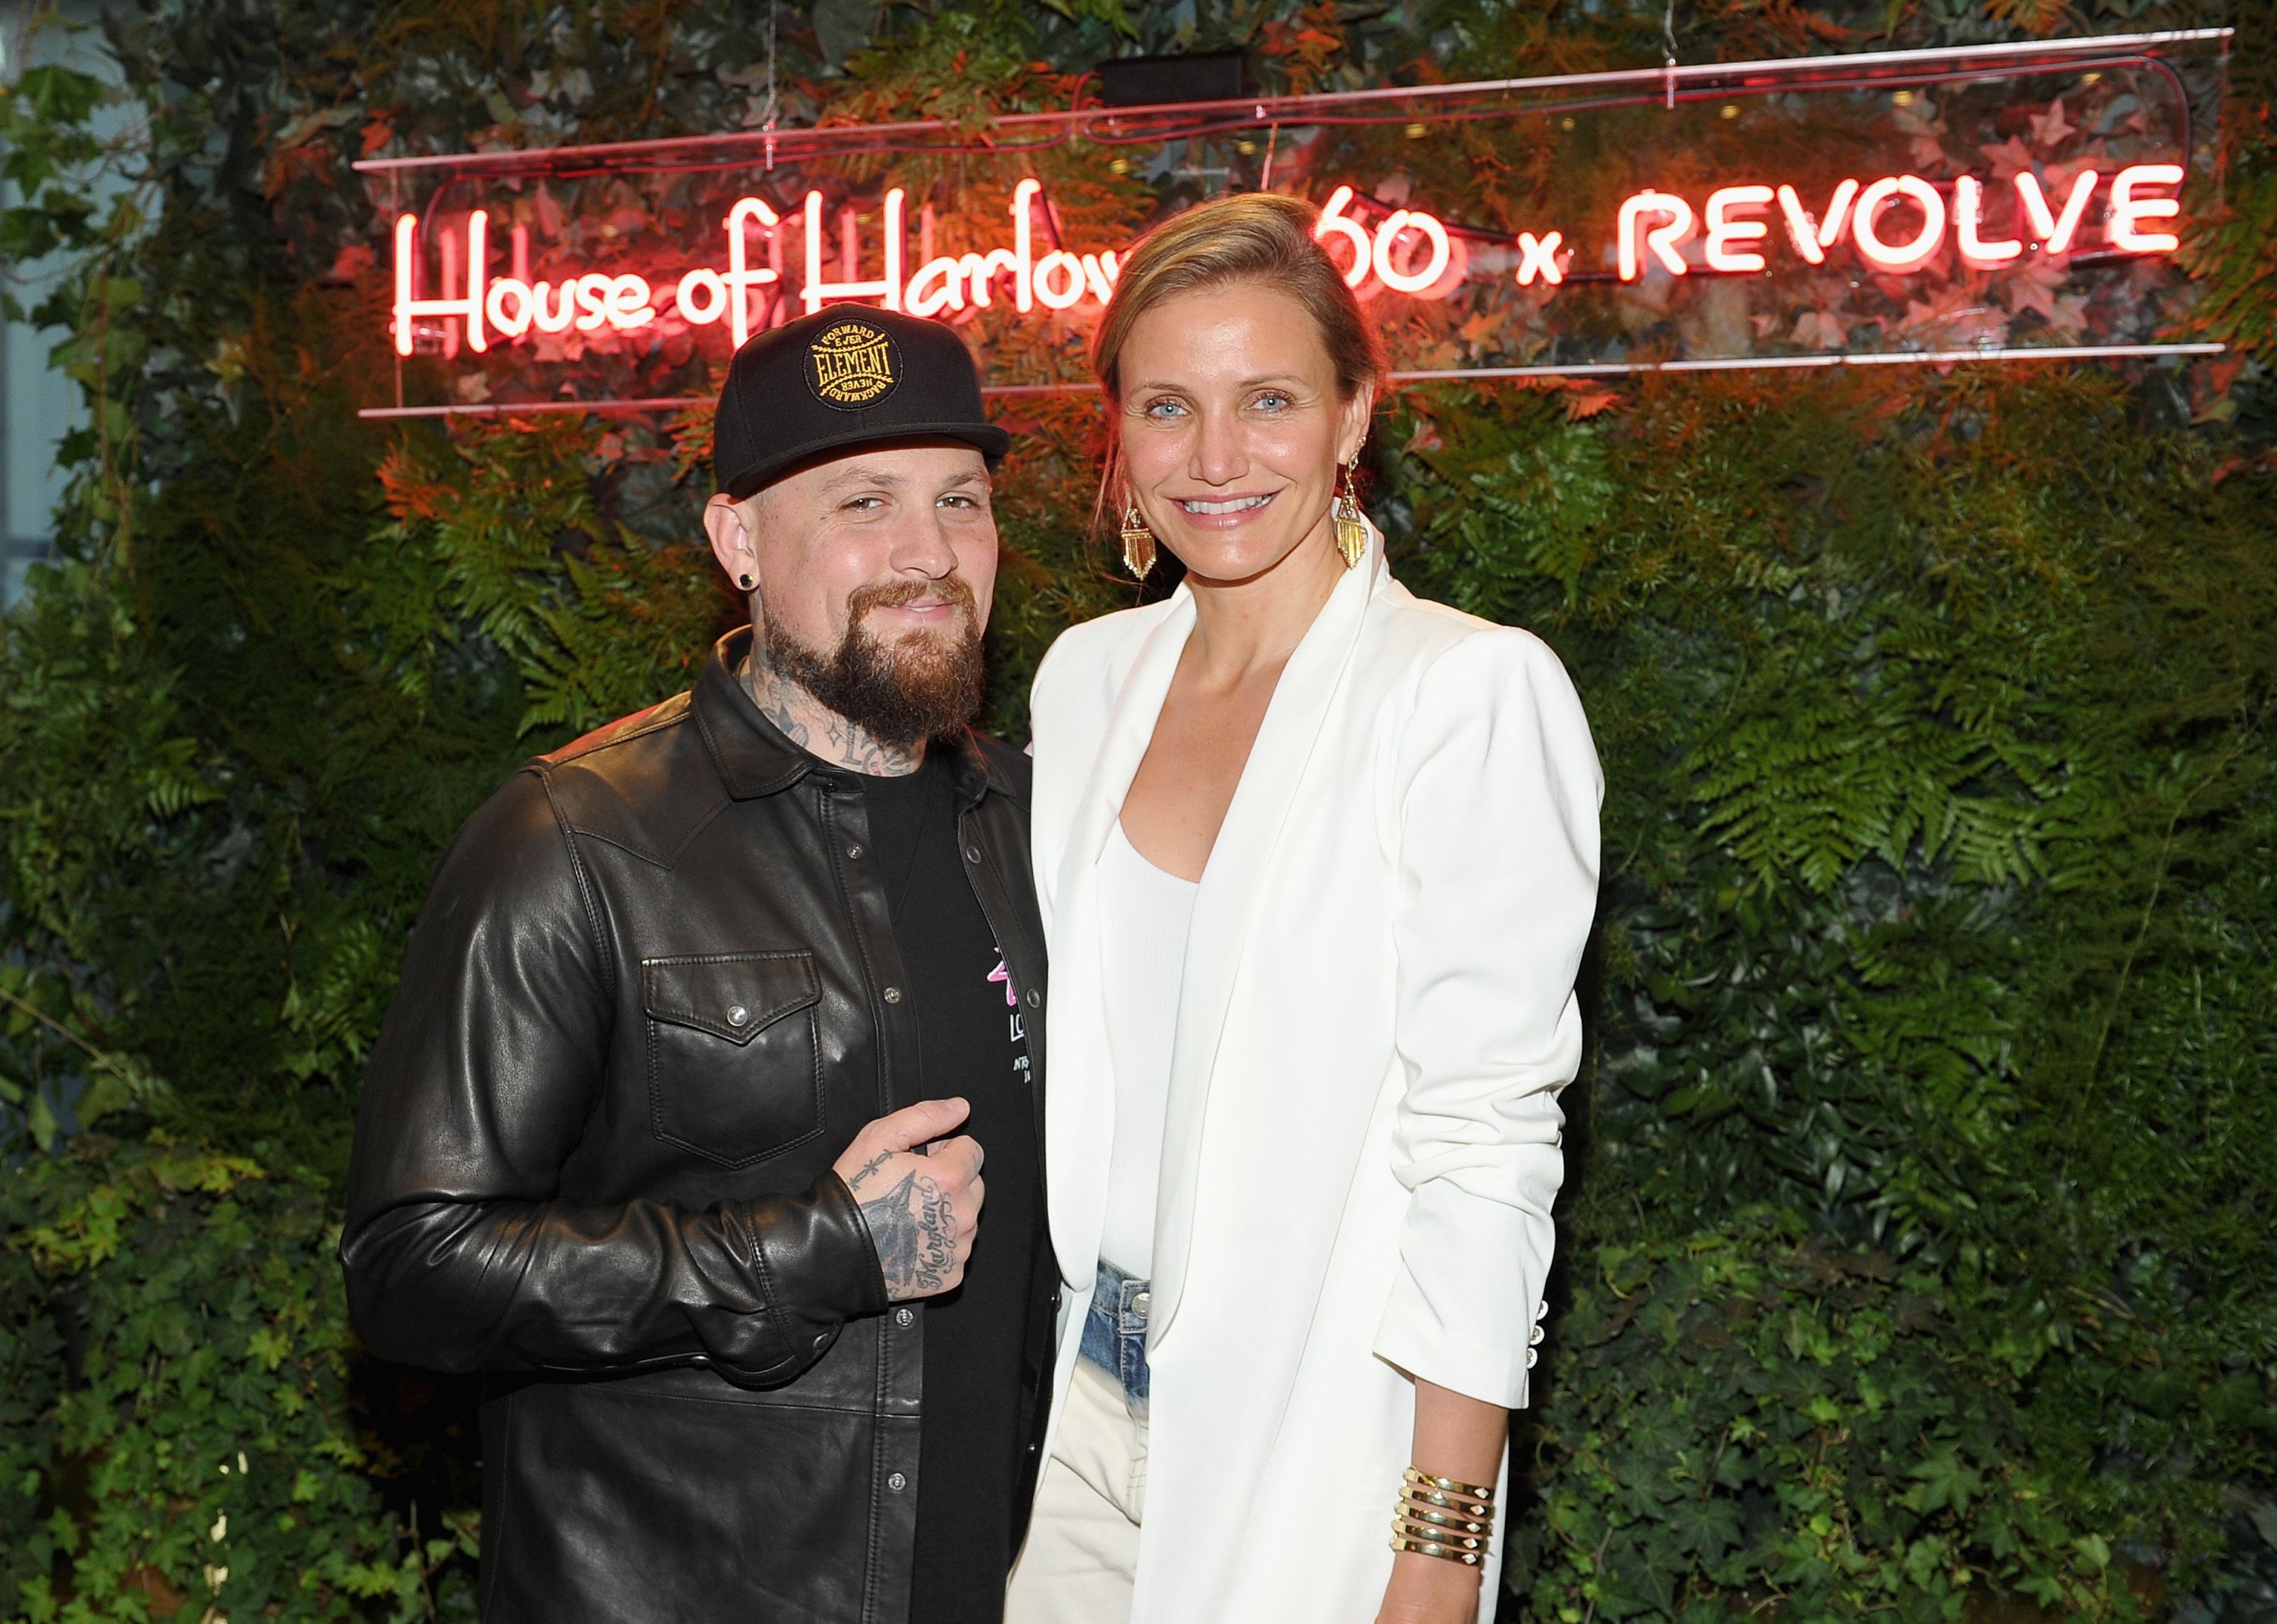 Benji Madden and Cameron Diaz at House of Harlow 1960 x REVOLVE on June 2, 2016, in Los Angeles, California. | Source: Getty Images